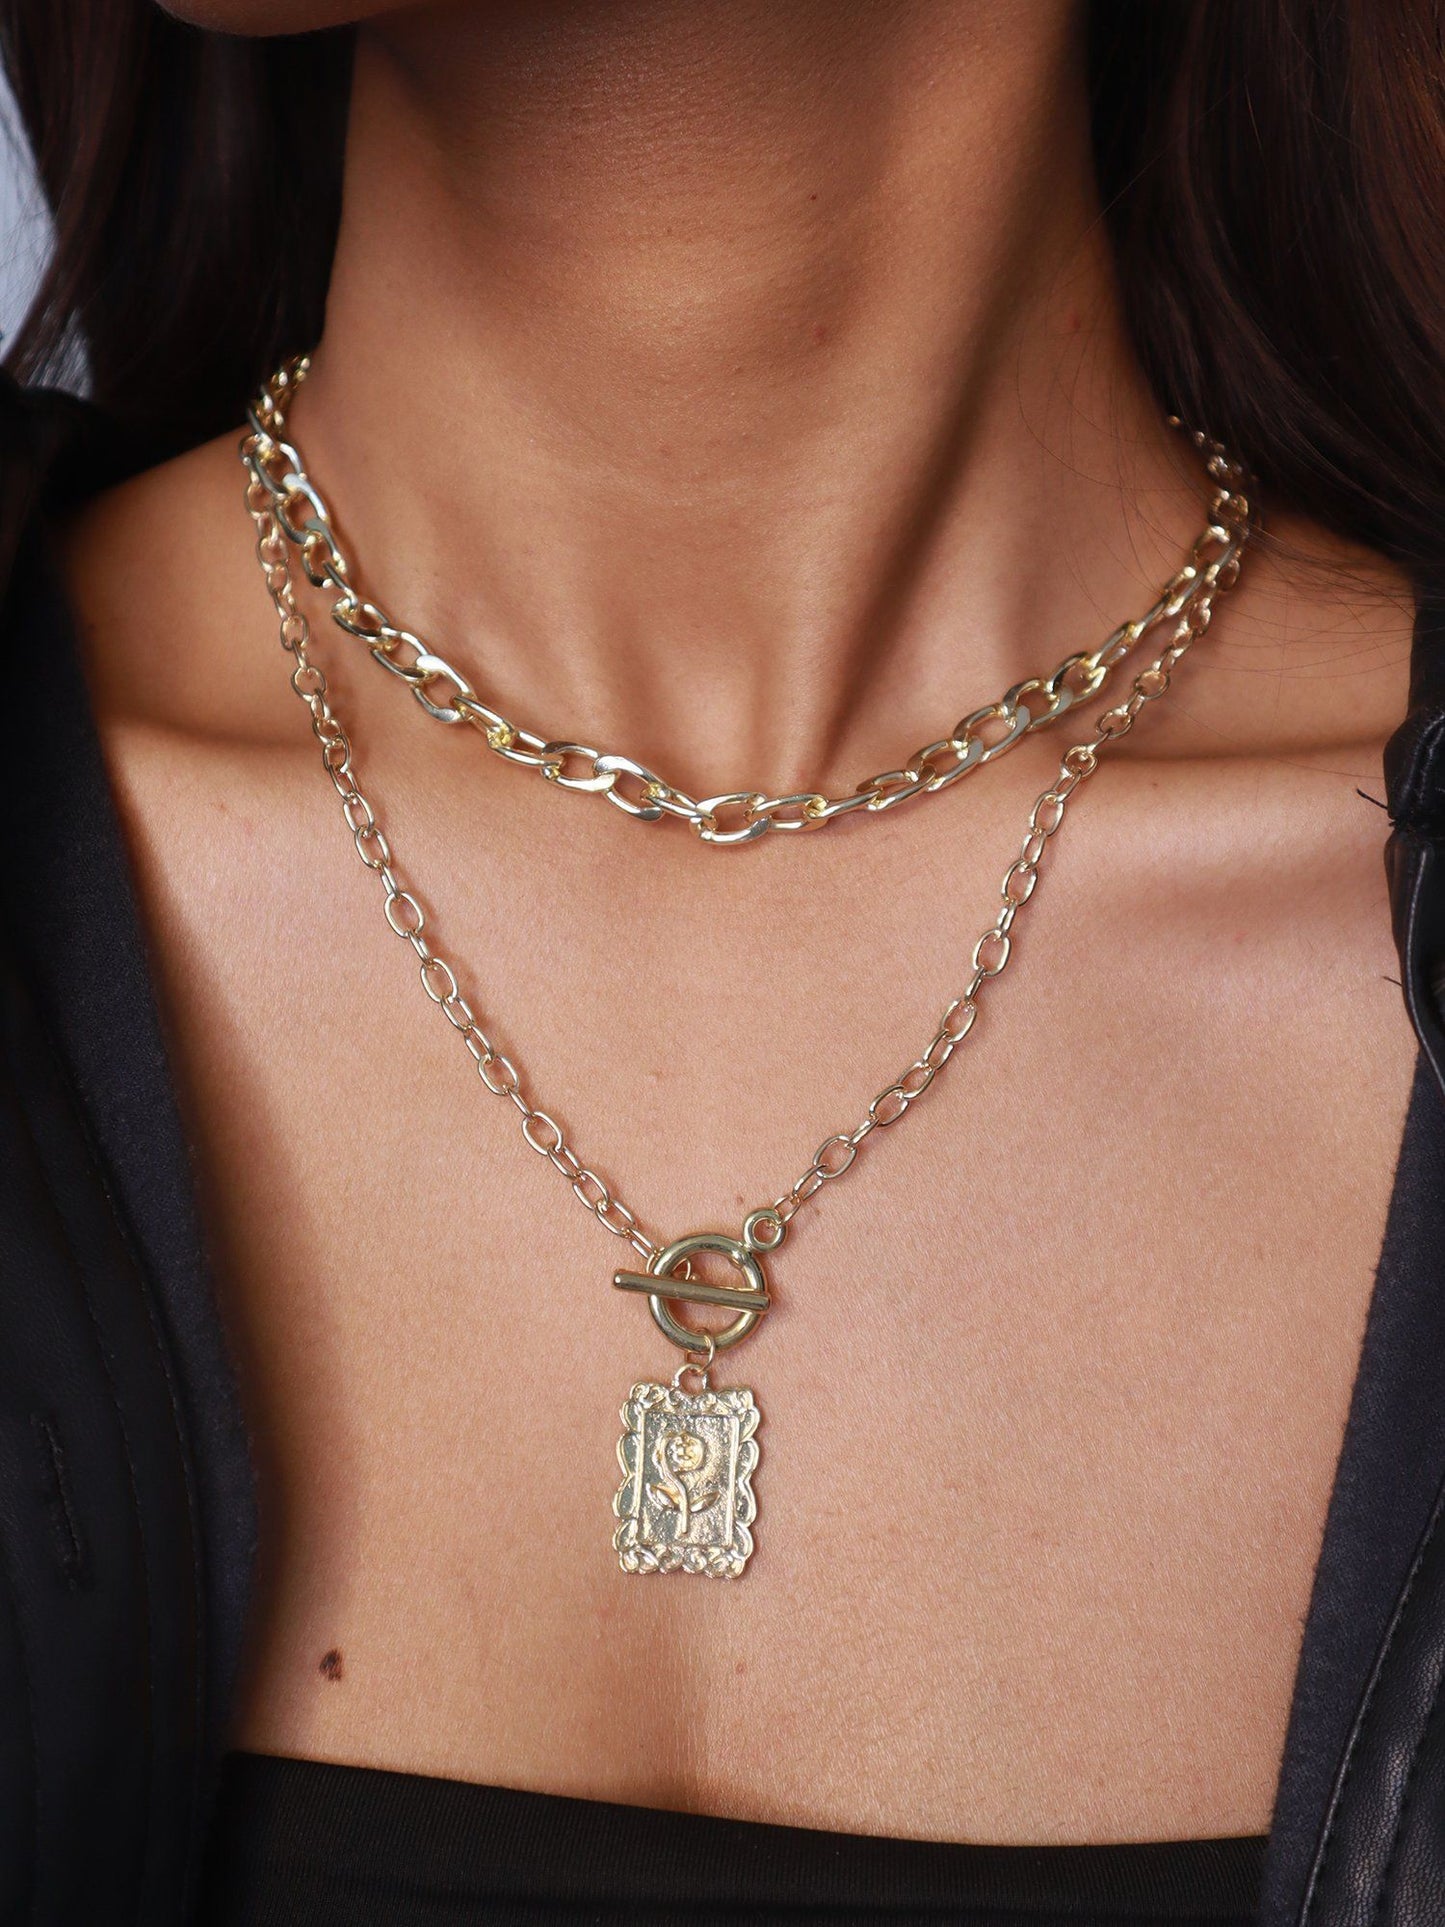 Statement Layered Gold Plated Necklace with Charm Pendant